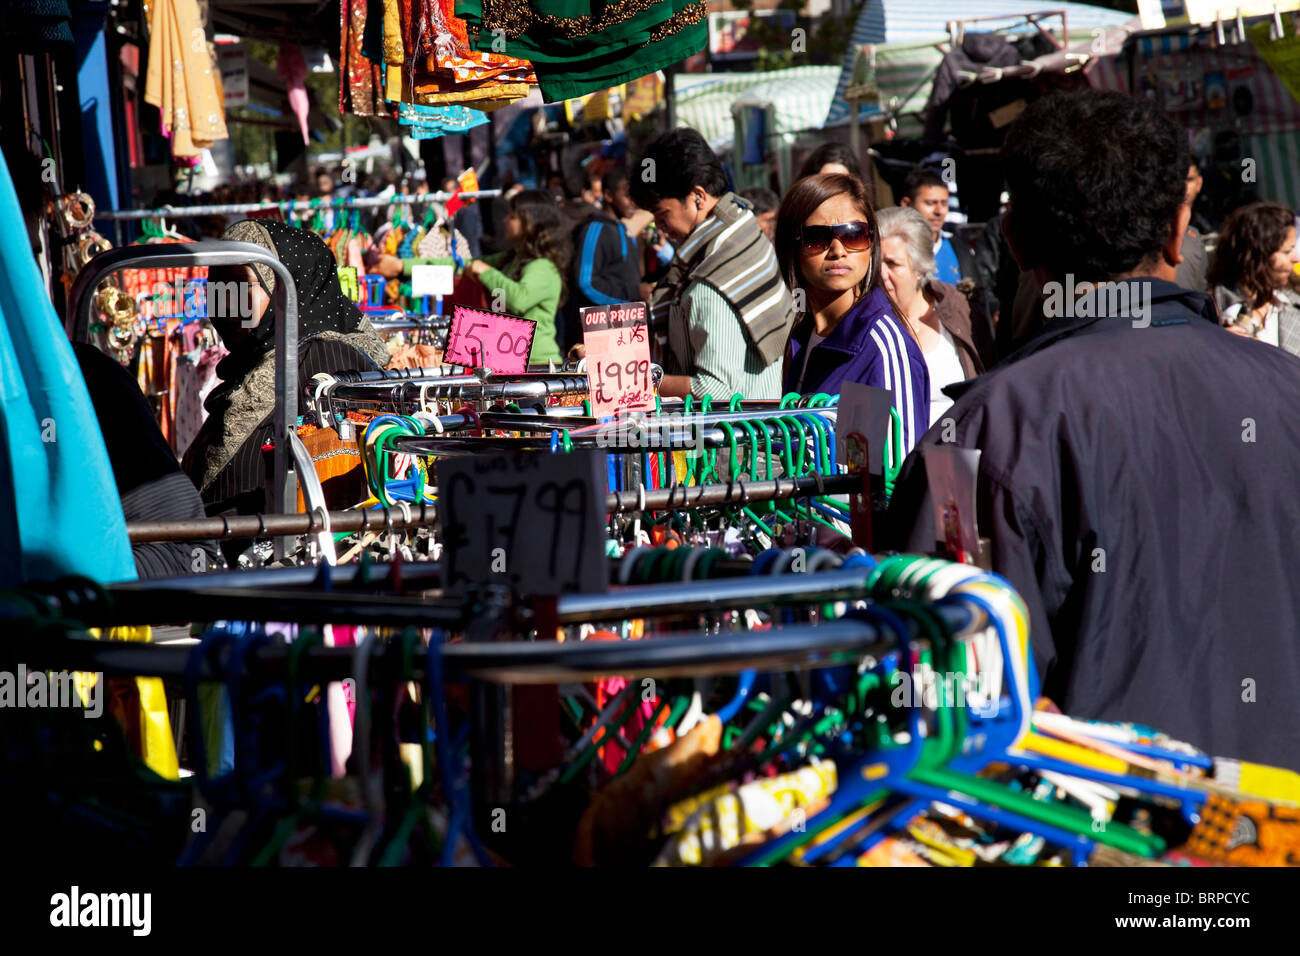 People from various ethnic, predominantly Muslim backgrounds around the market on Whitechapel High Street in East London. Stock Photo